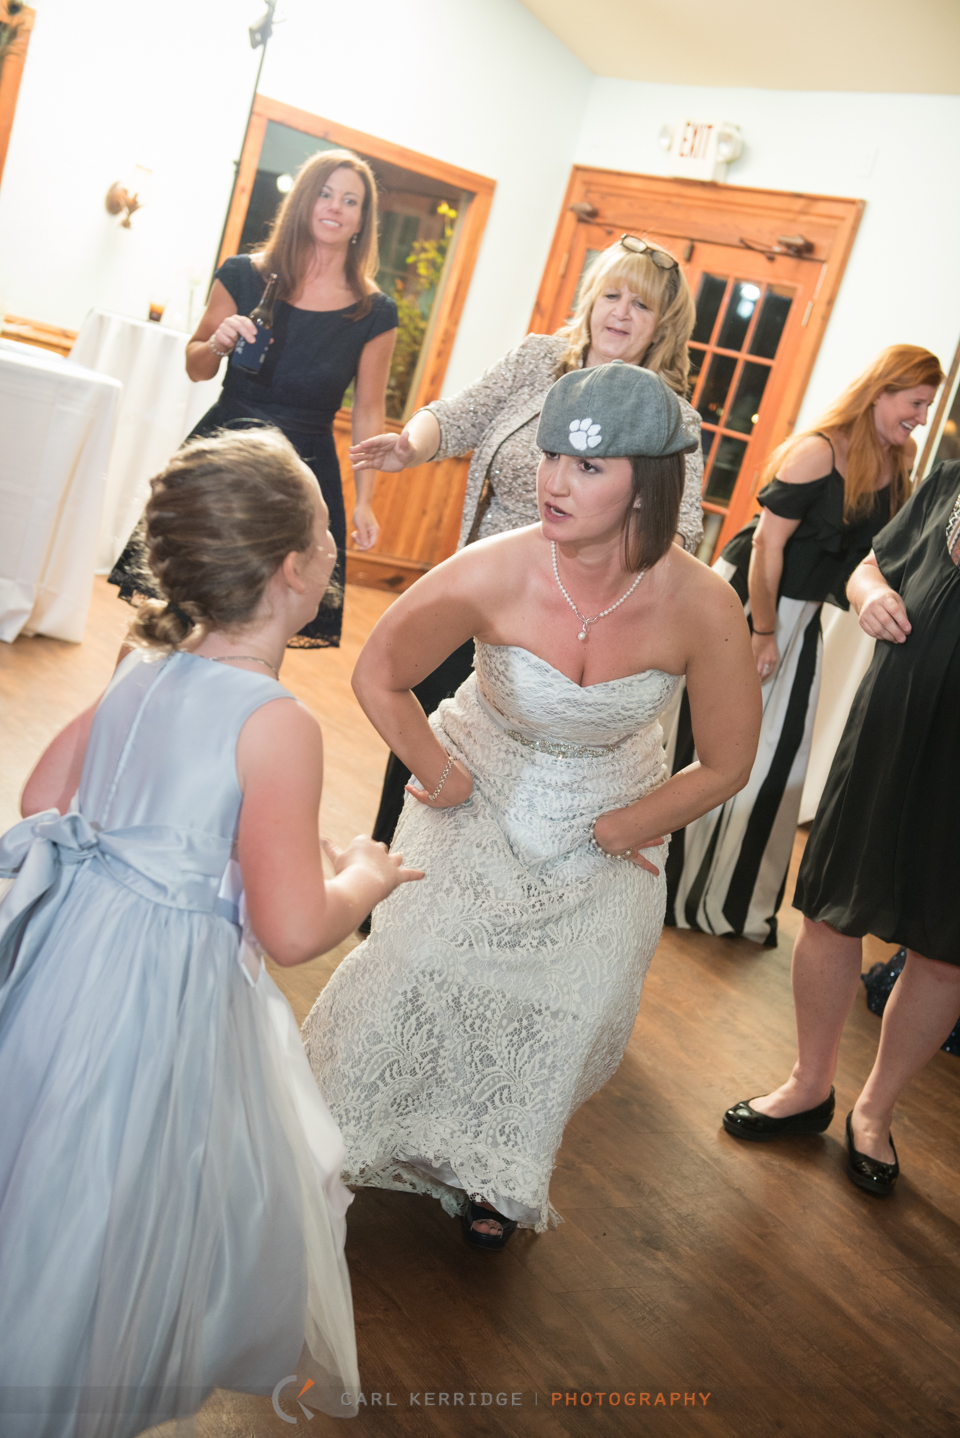 bride parties in a clemson hat at the wedding reception